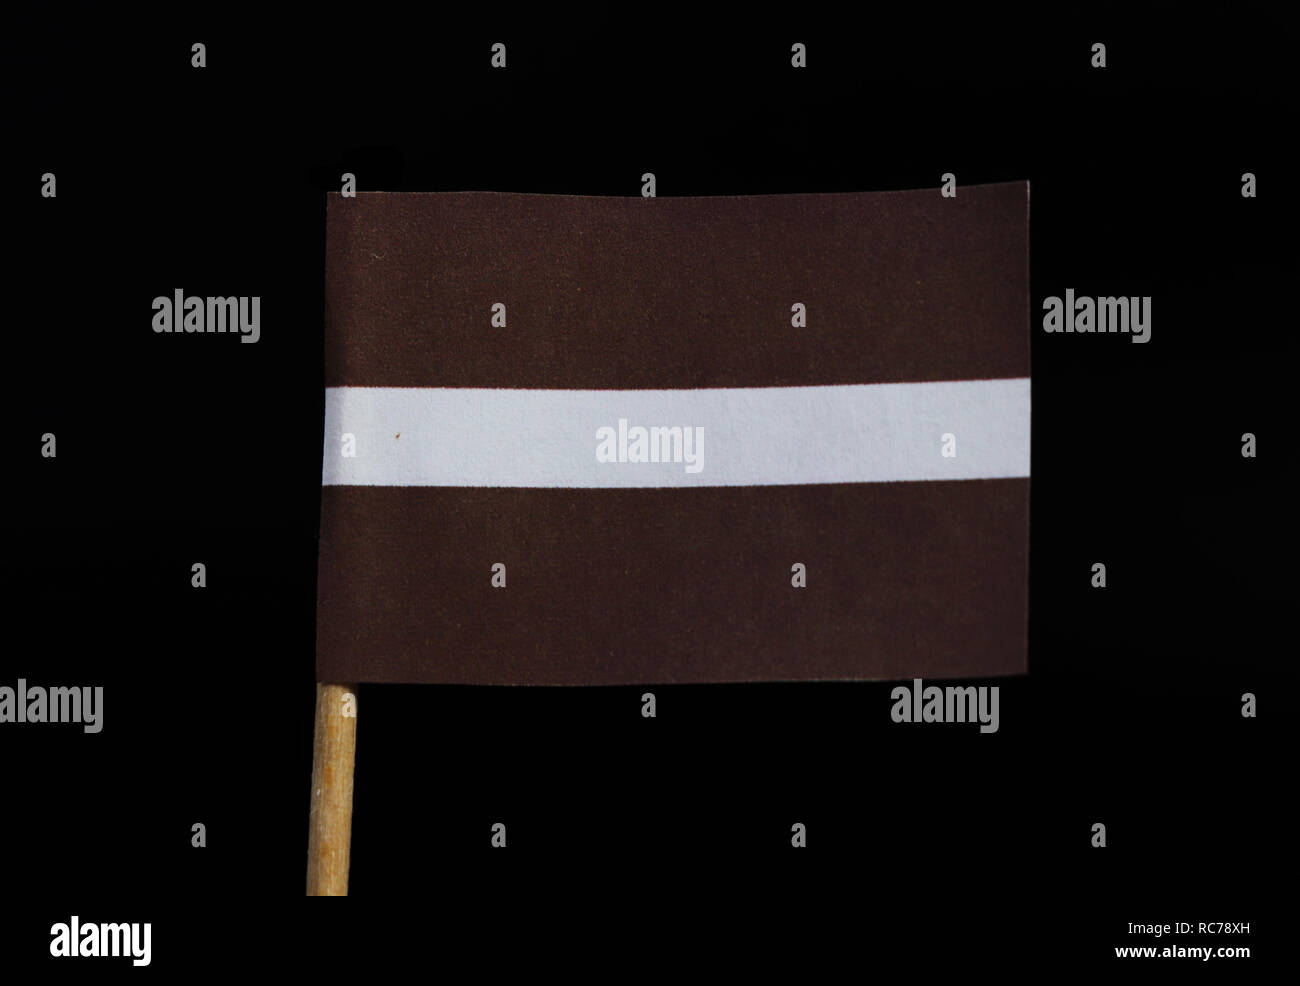 A unique and national flag of Latvia on toothpick on black background. A carmine field bisected by a narrow white stripe. Stock Photo